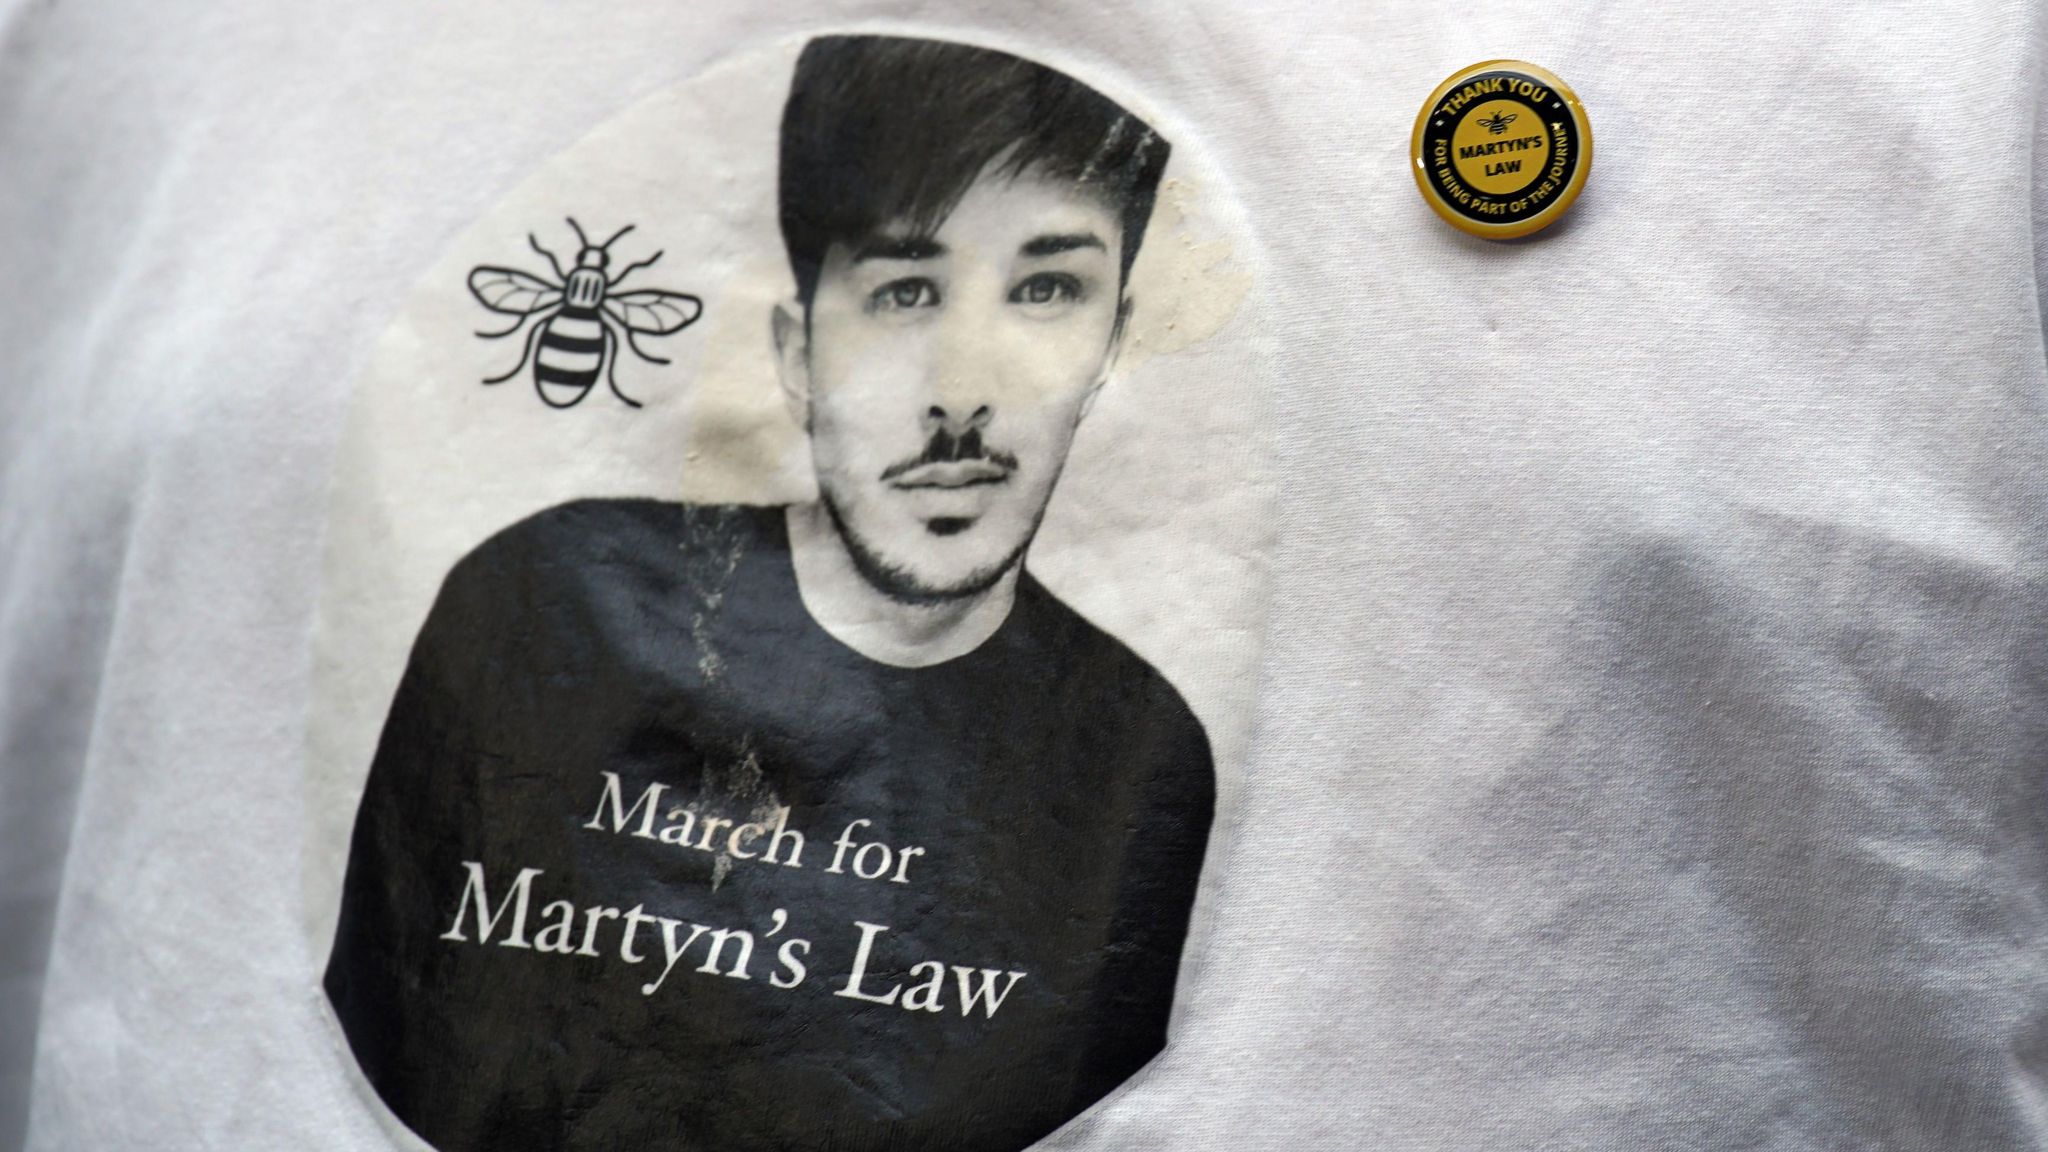 Campaign t-shirt with face of Martyn's Hett, calling for Martyn's Law